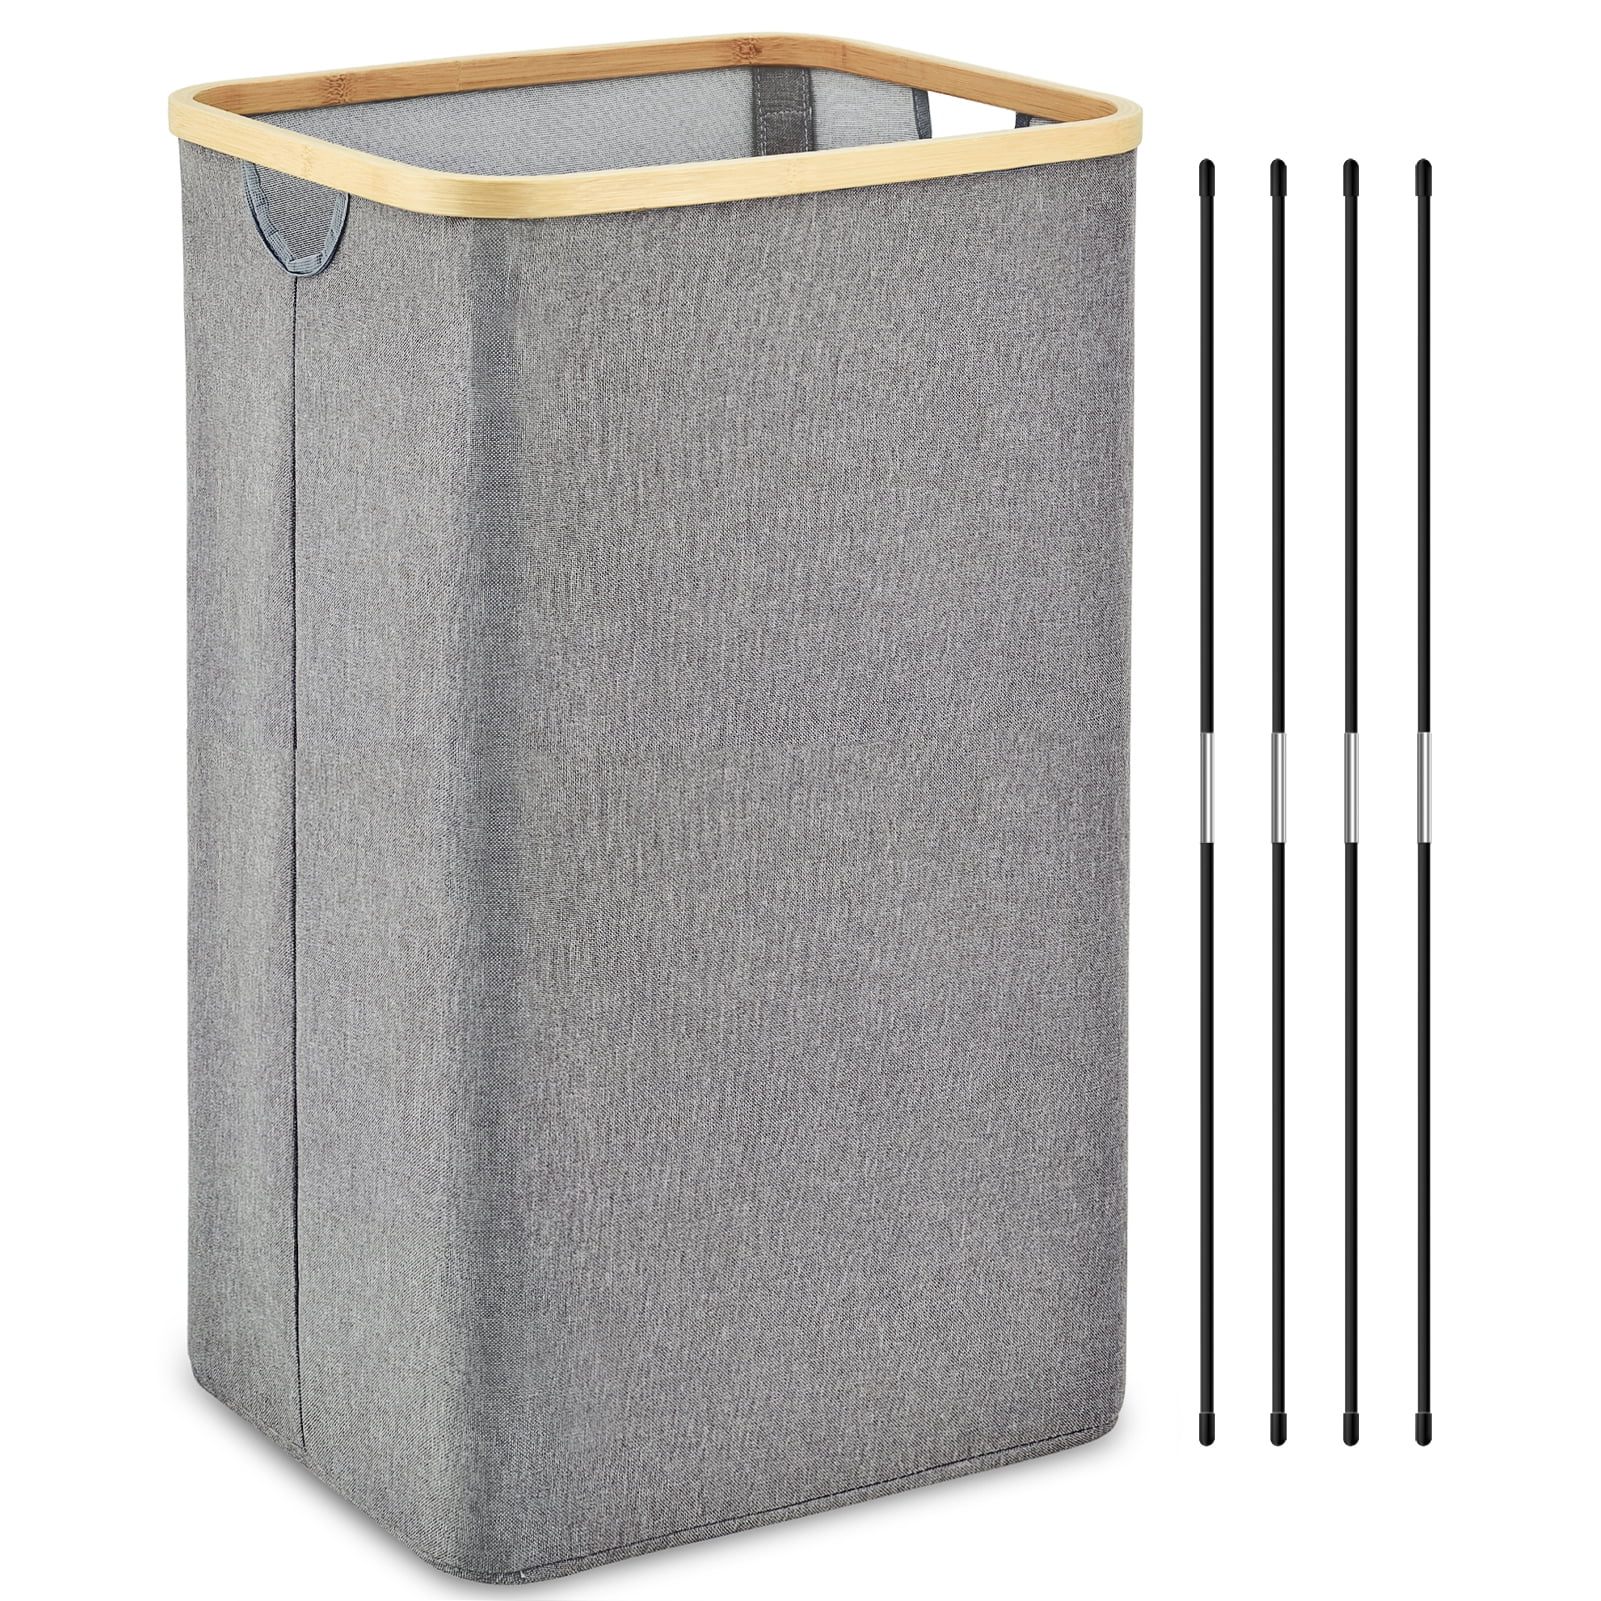 Homykic Laundry Hamper with Lid, 100L Tall Laundry Basket Collapsible with  Bamboo Handles, Large Waterproof Laundry Bin Storage for Dorm, Bathroom